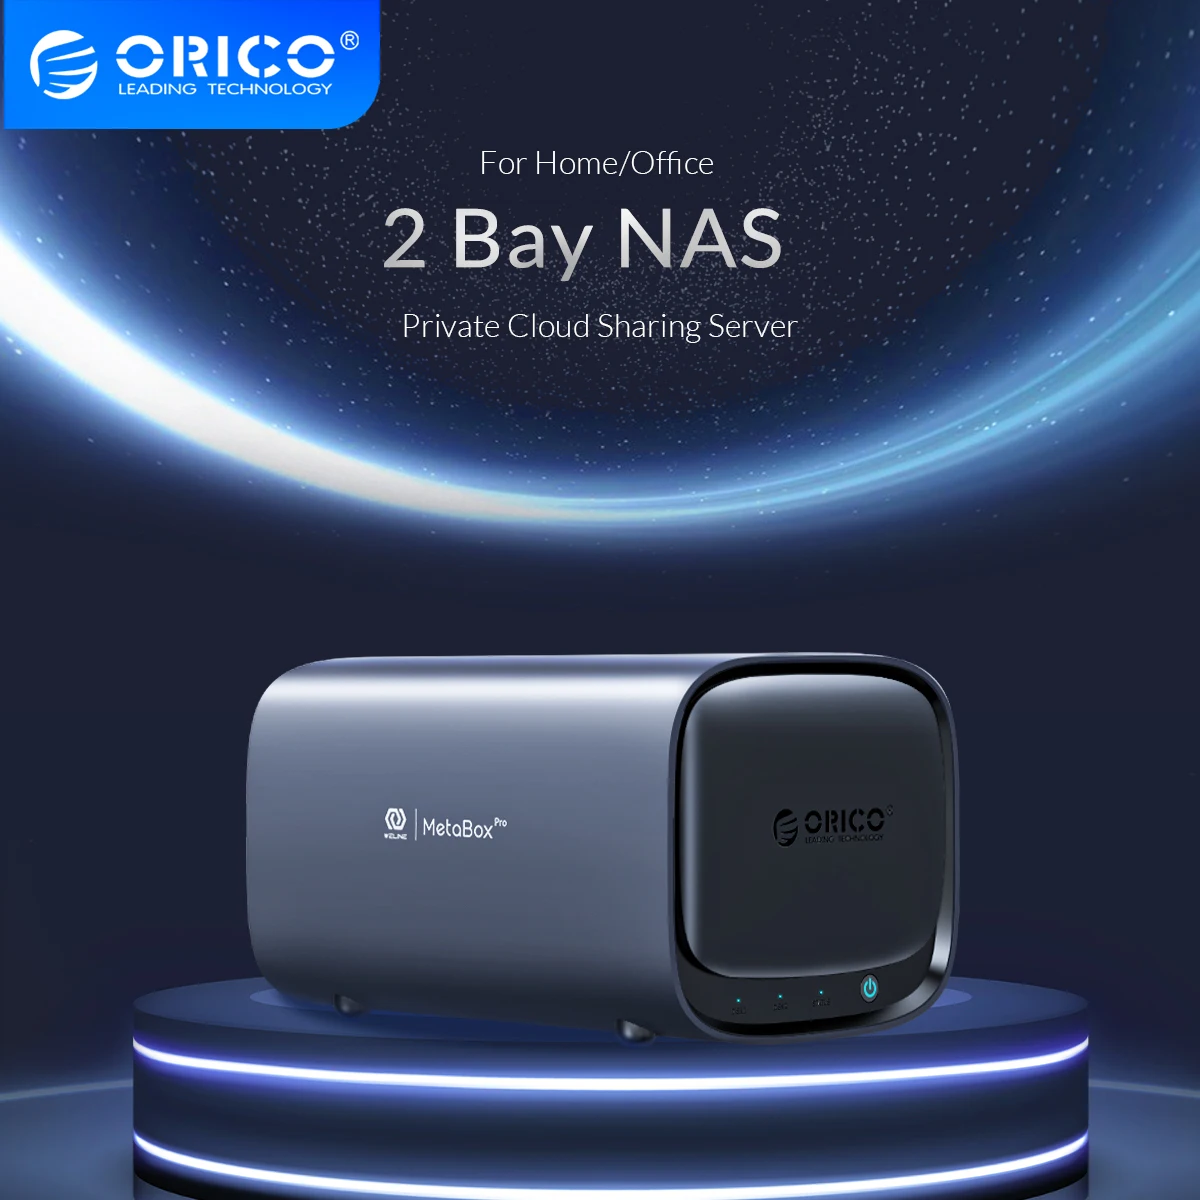 ORICO 2-Bay NAS 4GB x86 Dual Core Network Attached Storage Media Server Personal Private Cloud Storage Server for Home/Office